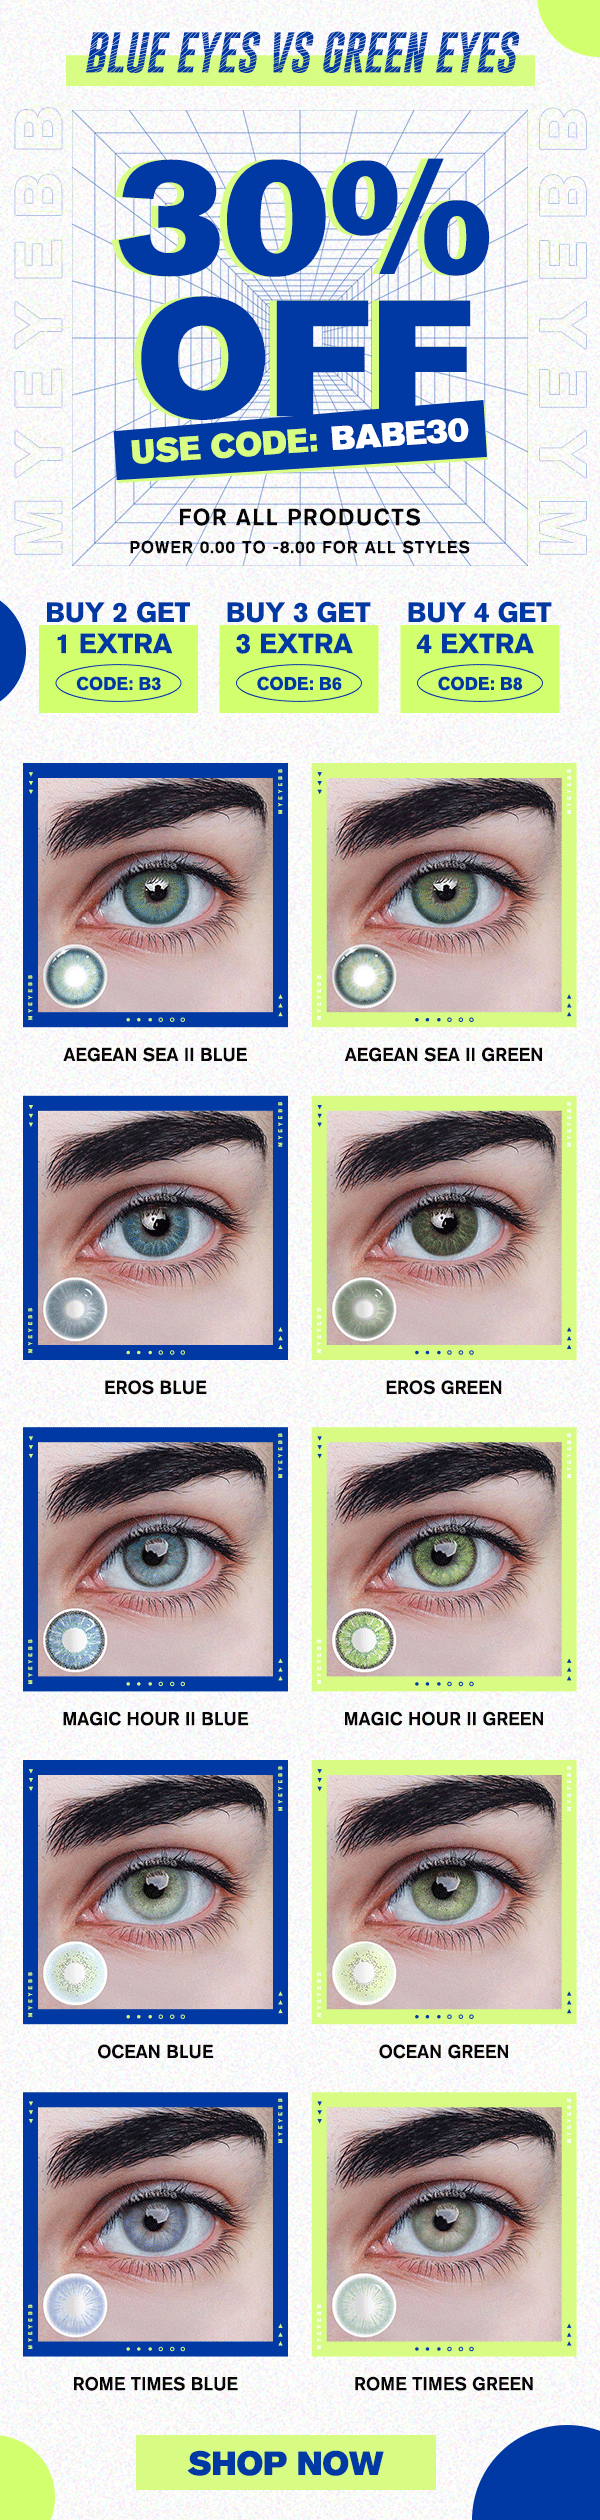 BLUE EYES VS GREEN EYES 0% FOR ALL PRODUCTS POWER0.00 TO -8.00 FOR ALL STYLES BUY 2 GET BUY 3 GET BUY 4 GET 1 EXTRA 3 EXTRA 4 EXTRA CODE: B3 CODE: B6 CODE: B8 AEGEAN SEA Il BLUE AEGEAN SEA Il GREEN MAGIC HOUR Il BLUE MAGIC HOUR Il GREEN ROME TIMES BLUE ROME TIMES GREEN SHOP NOW 